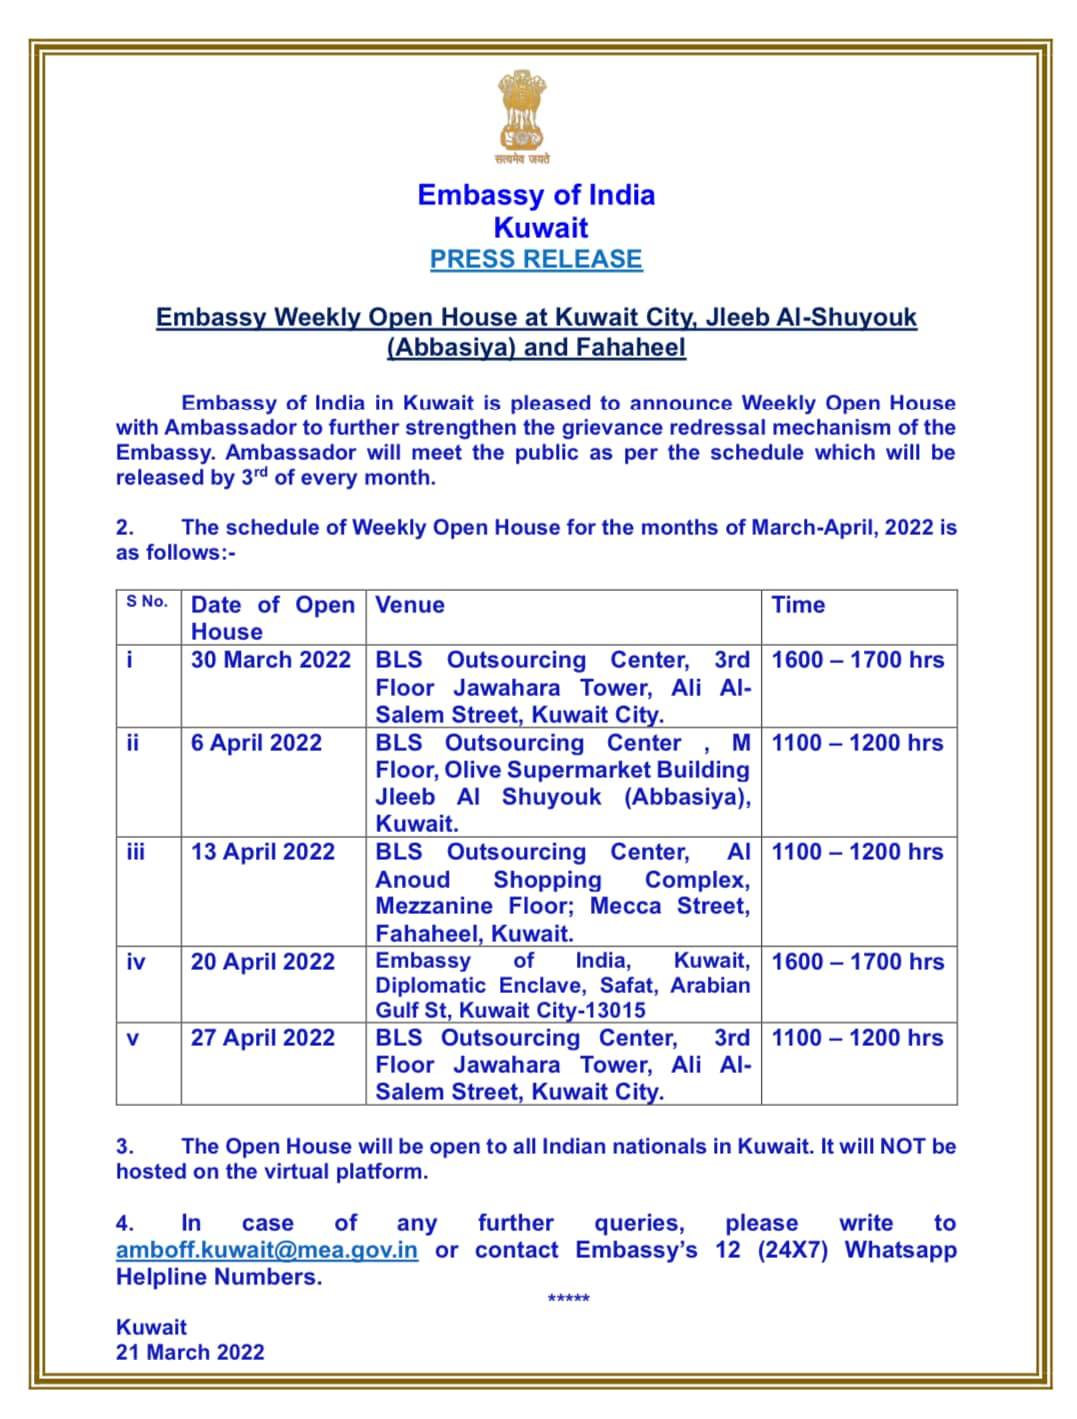 Indian Embassy Weekly Open House List of Locations with Date and Time, iiQ8 info